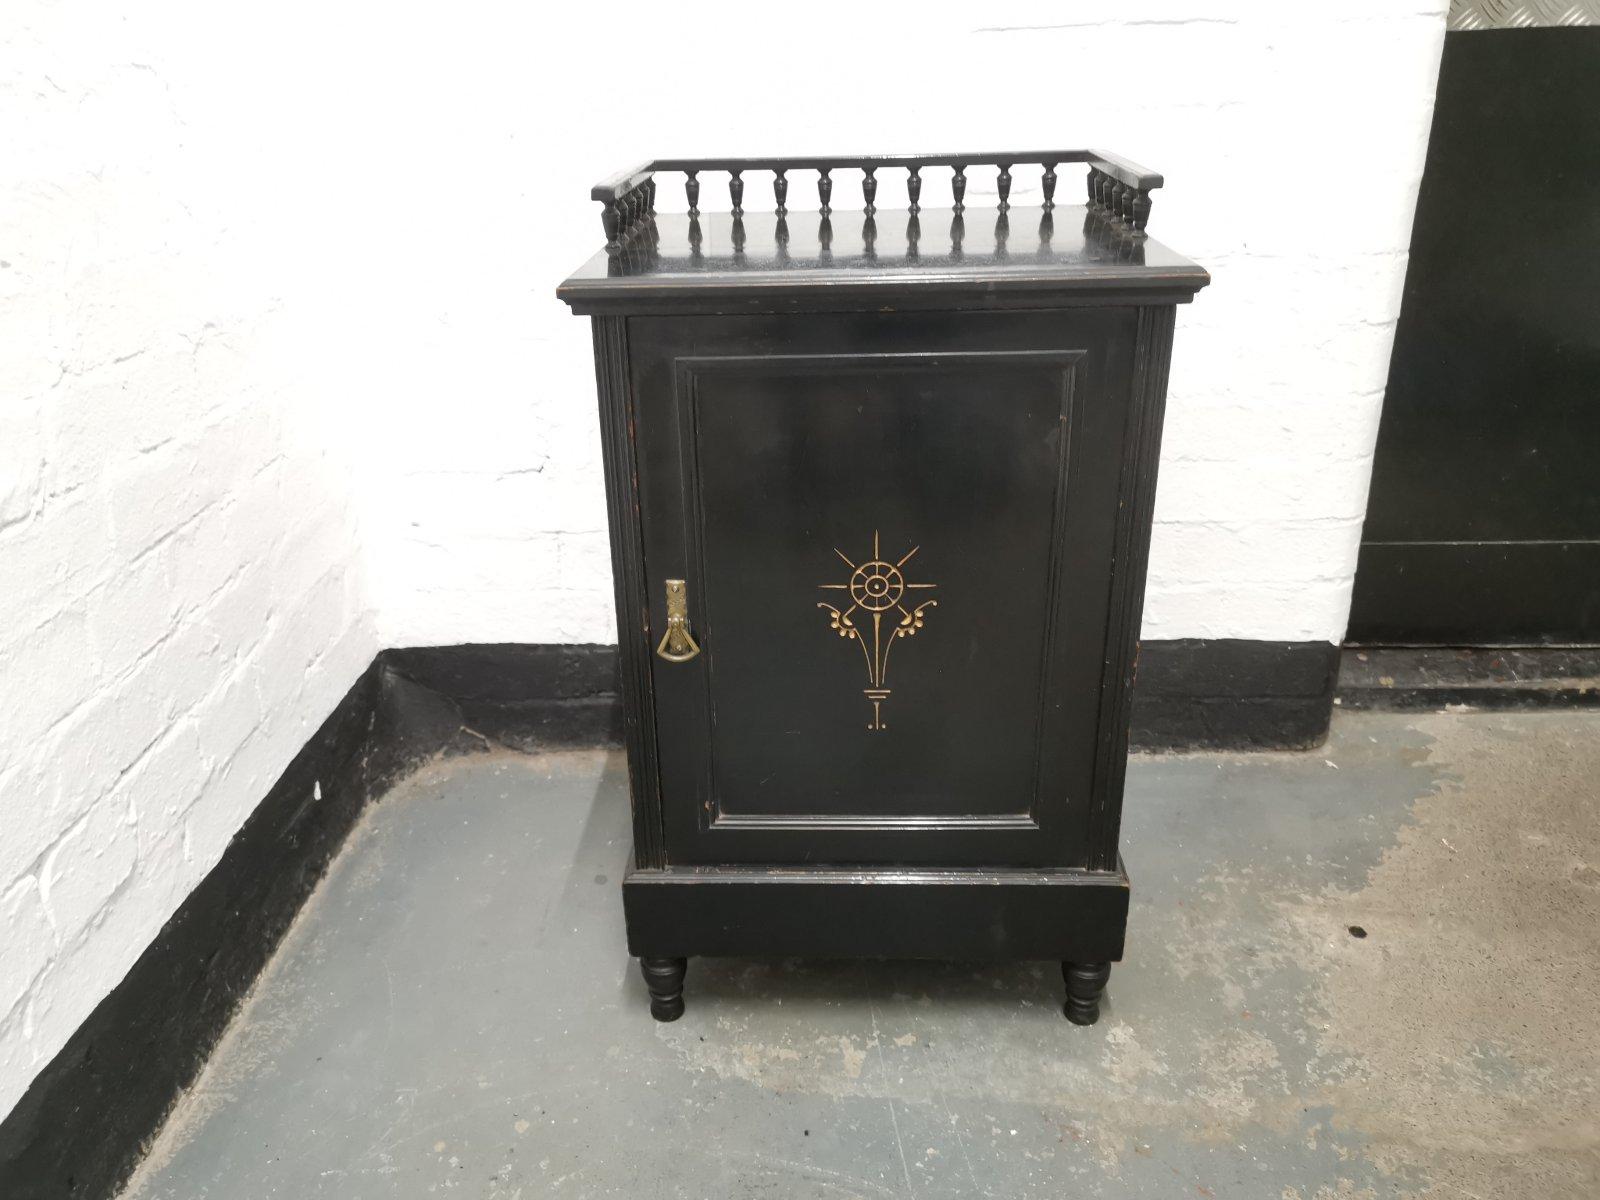 In the style of Dr. C dresser, probably made by Gillows.
A fine English Aesthetic Movement ebonized walnut bedside cabinet with a three-quarter gallery to the top, a single panelled door below with an incised and gilded stylized floral detail to